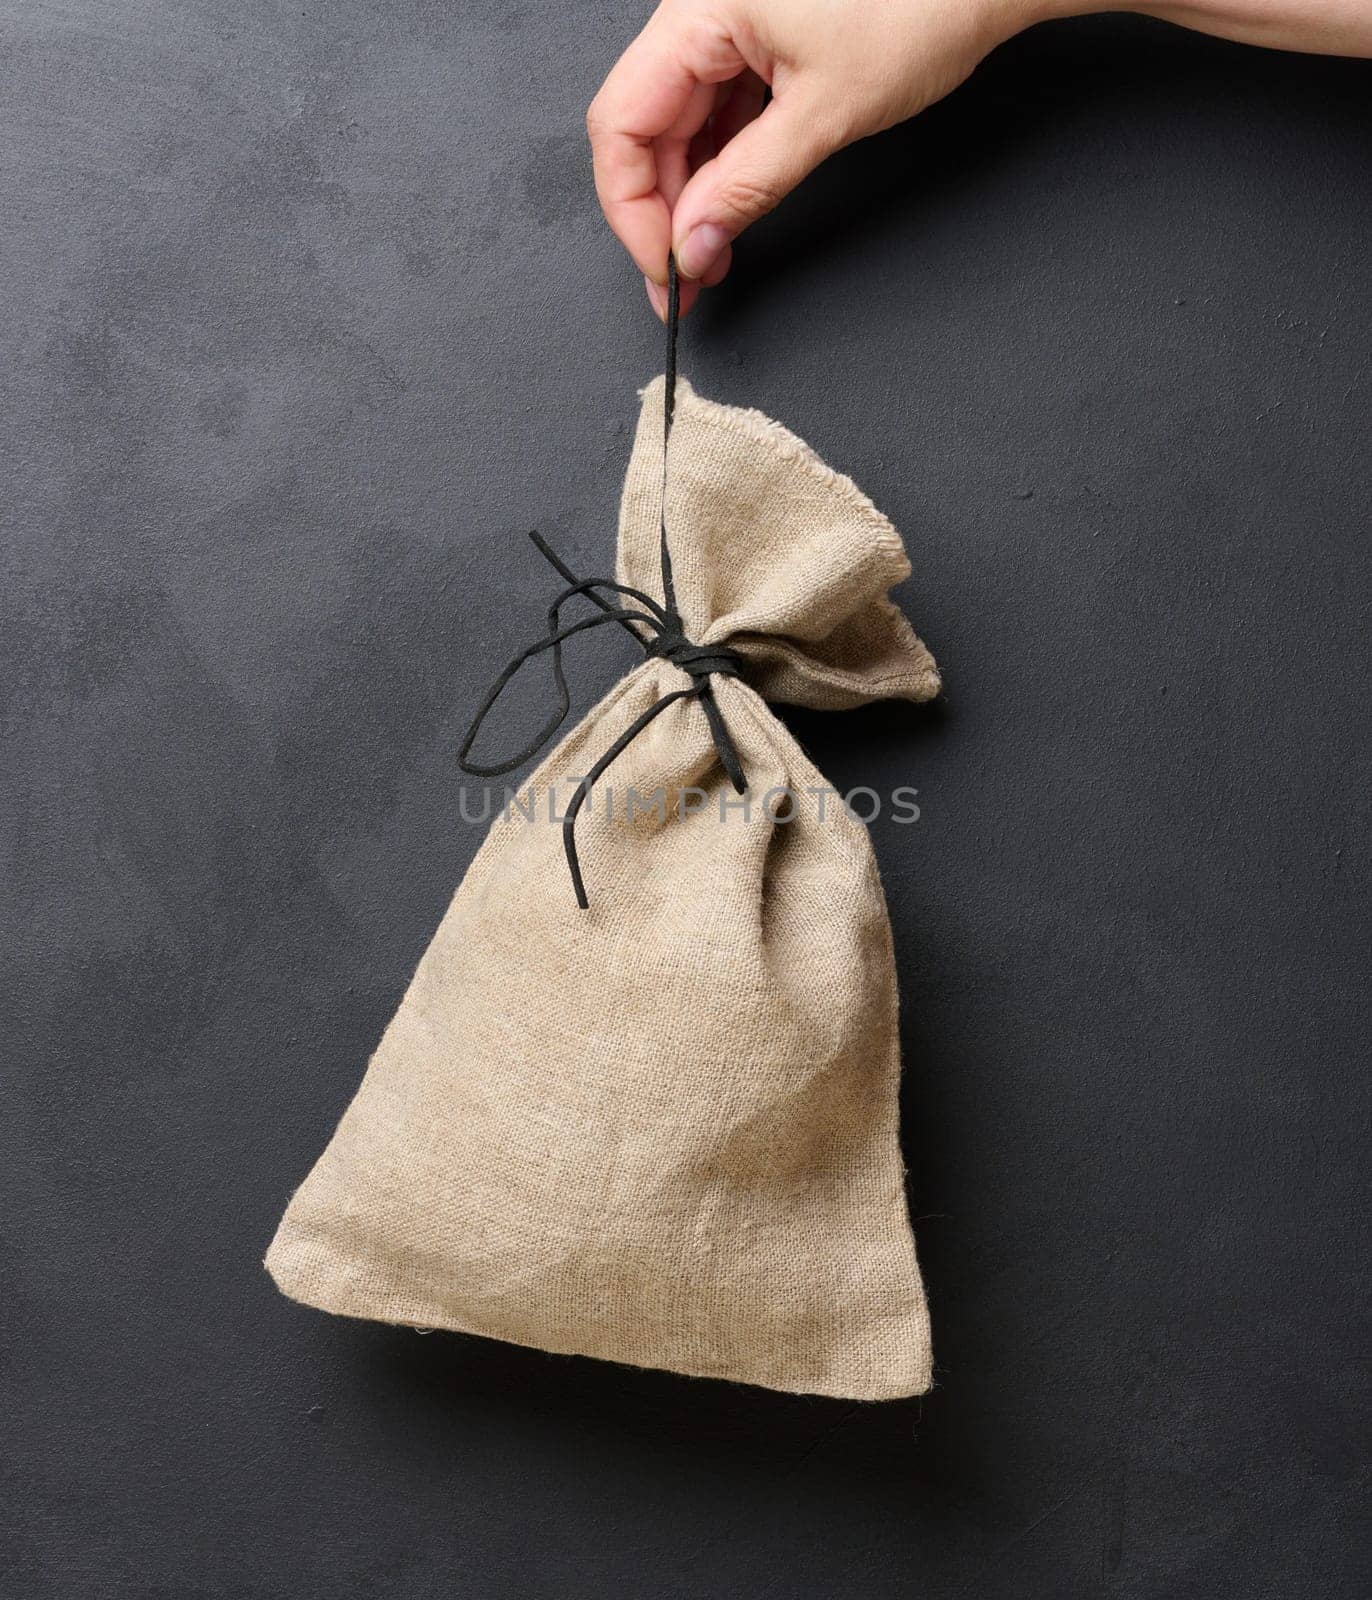 A woman's hand holds a canvas bag on a black background, the concept of a subsidy, help